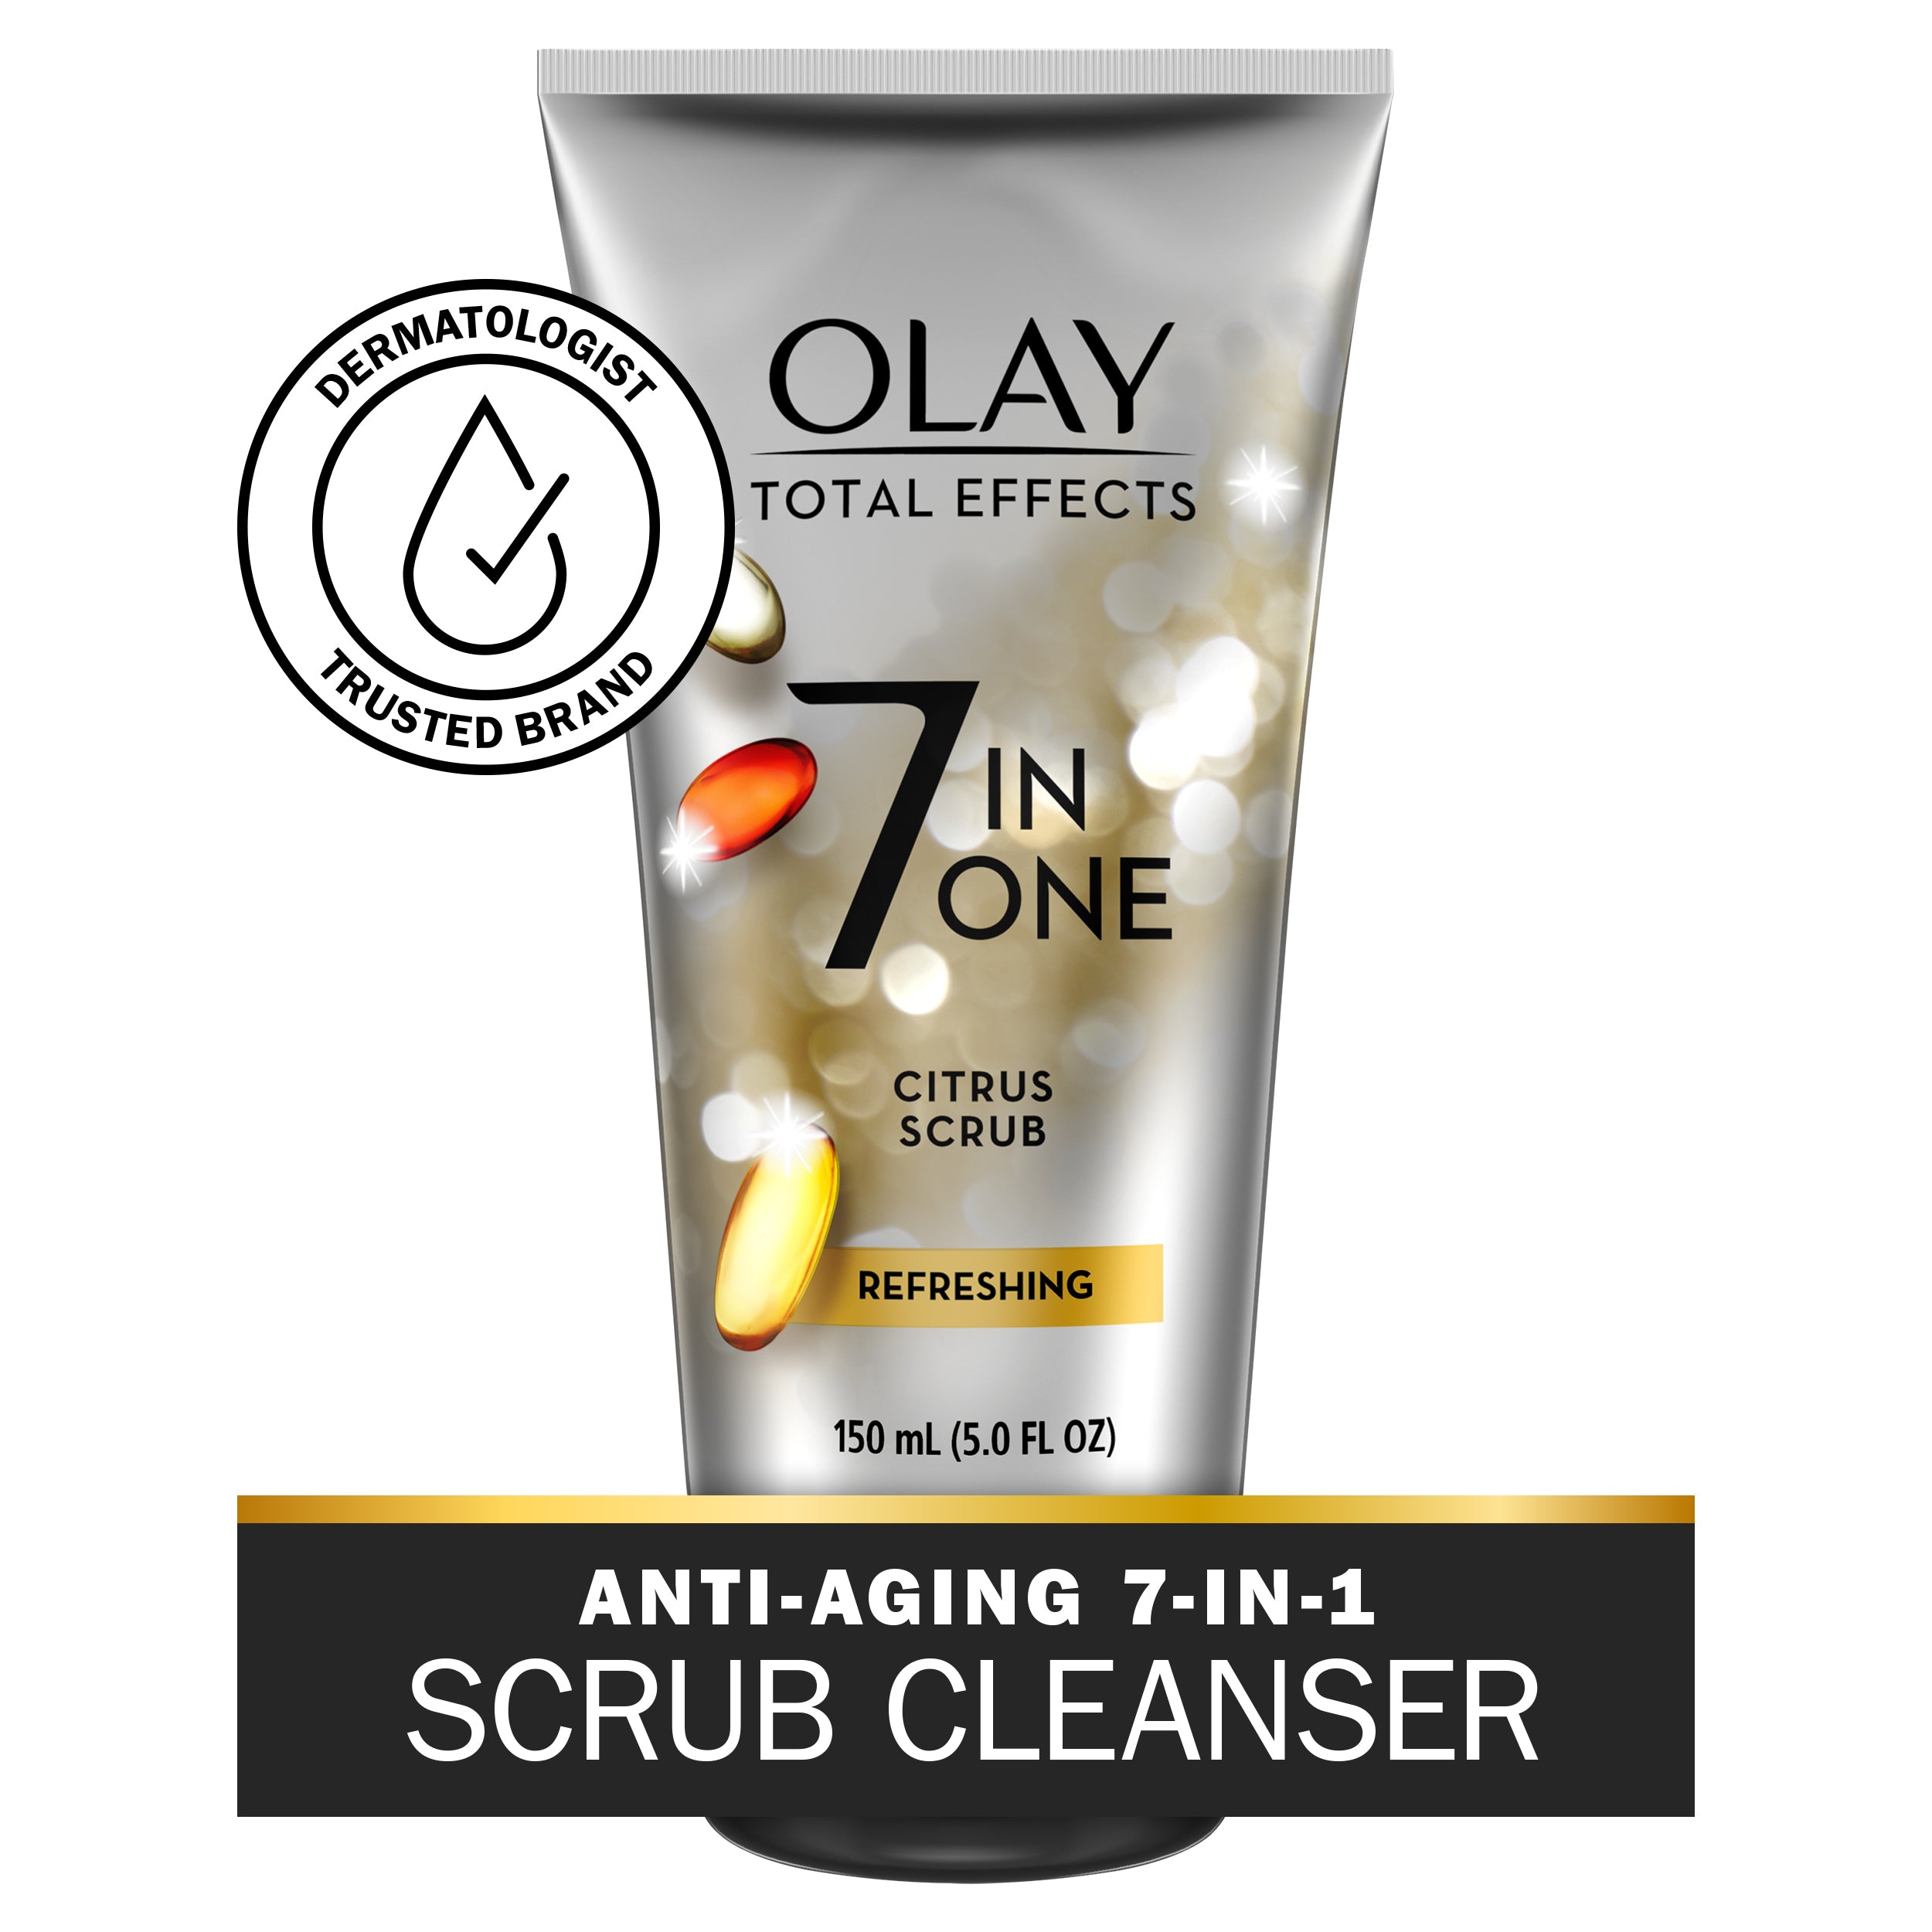 Olay Total Effects Face Wash, 7 in 1 Refreshing Citrus Scrub, All Skin Types, 5 fl oz | MTTS319